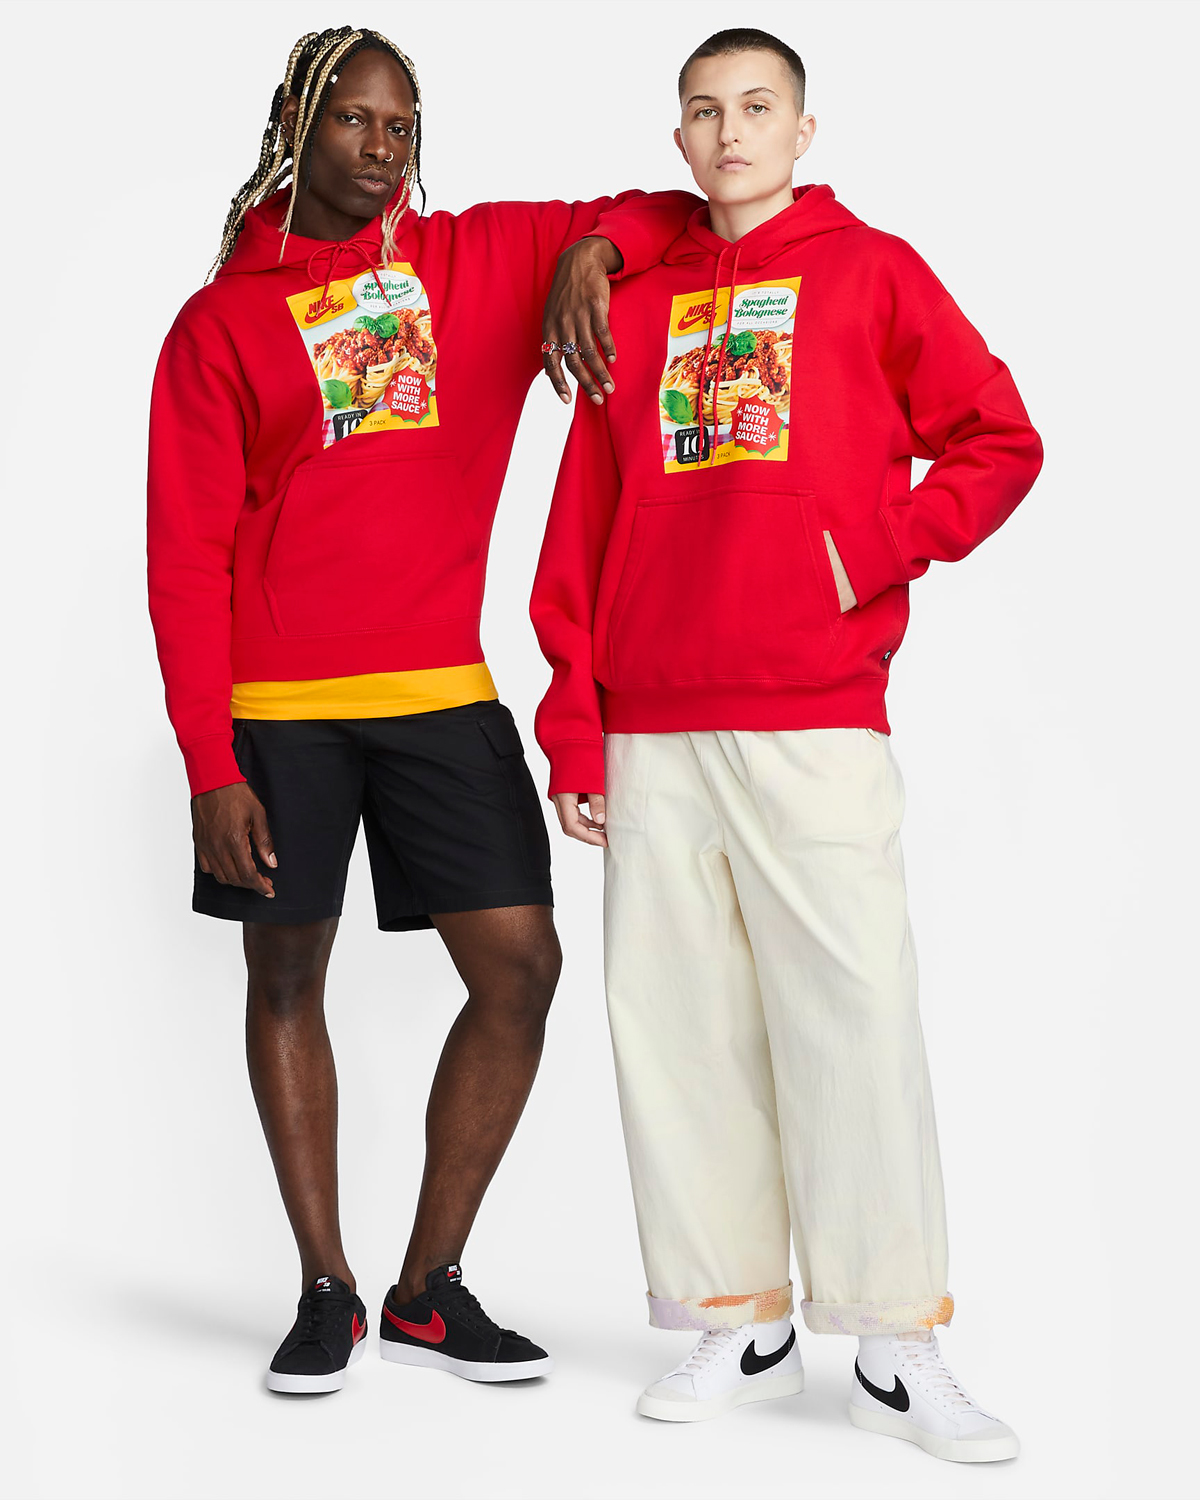 Nike SB Spaghetti Bolognese Hoodie University Red Outfit